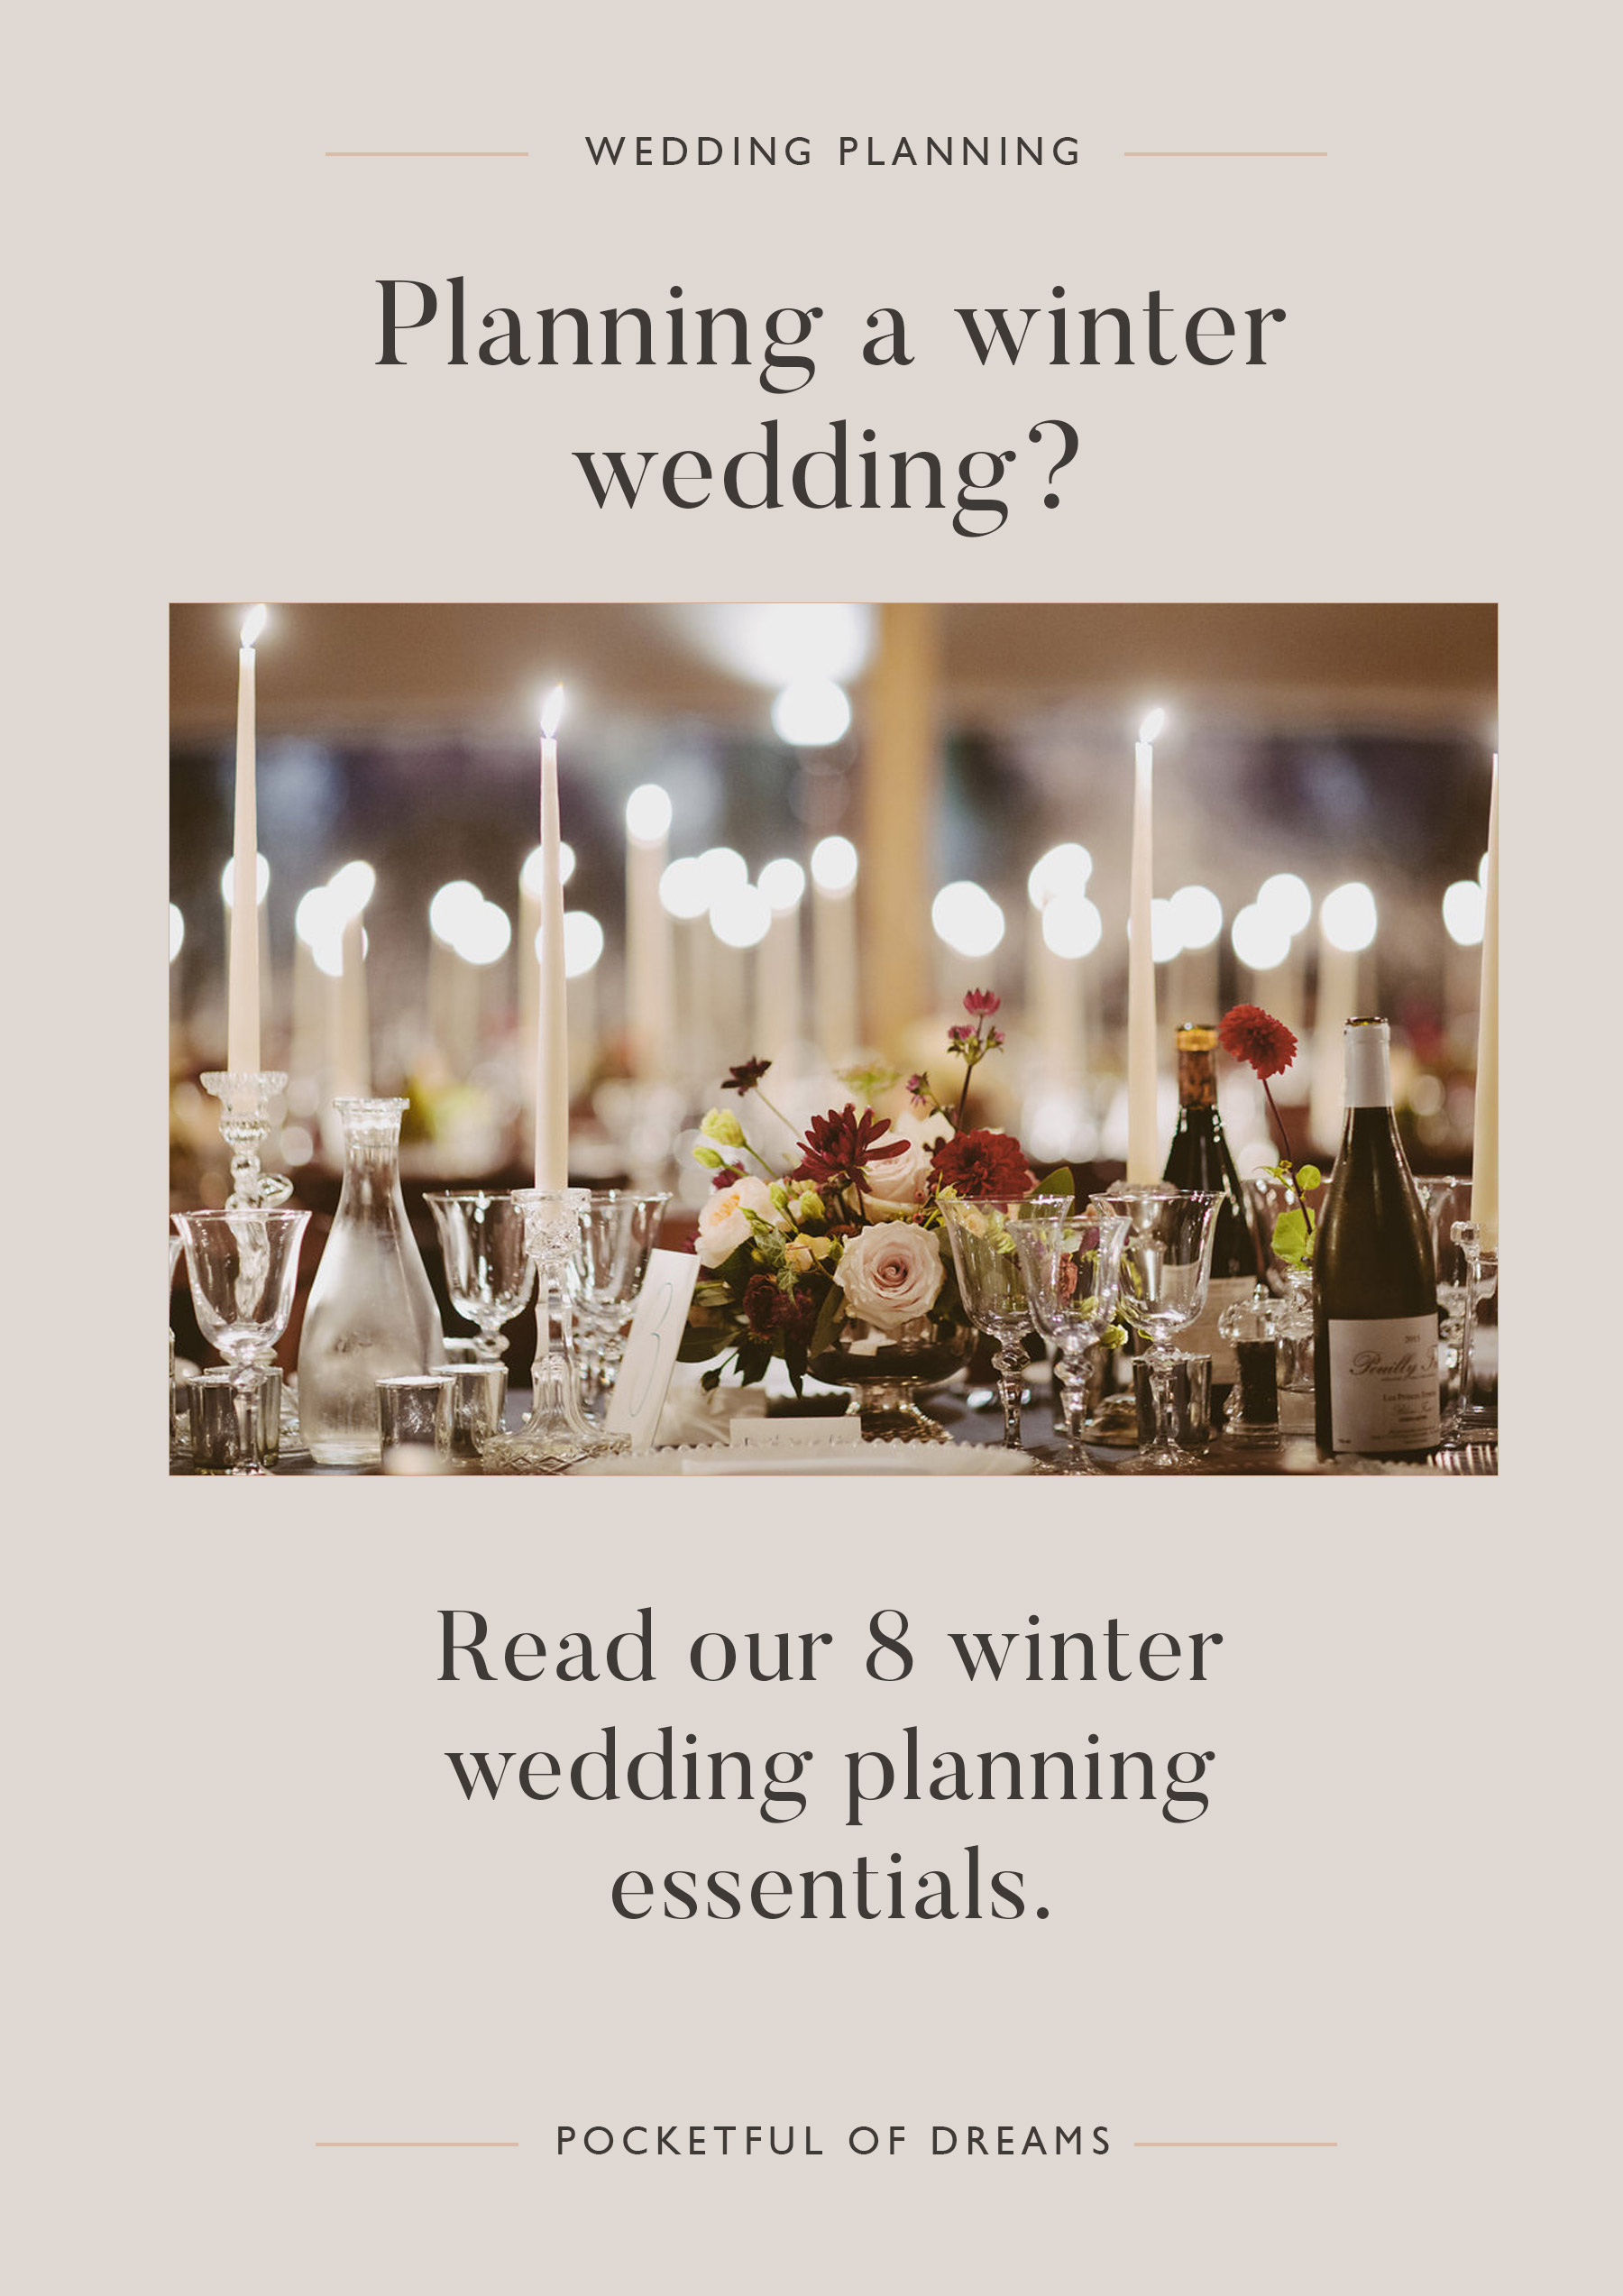 Winter Wedding planning advice, Private Estate Weddings, top tips and advice, from wedding planning expert Michelle Kelly, Pocketful of Dreams. Luxury Wedding Planner